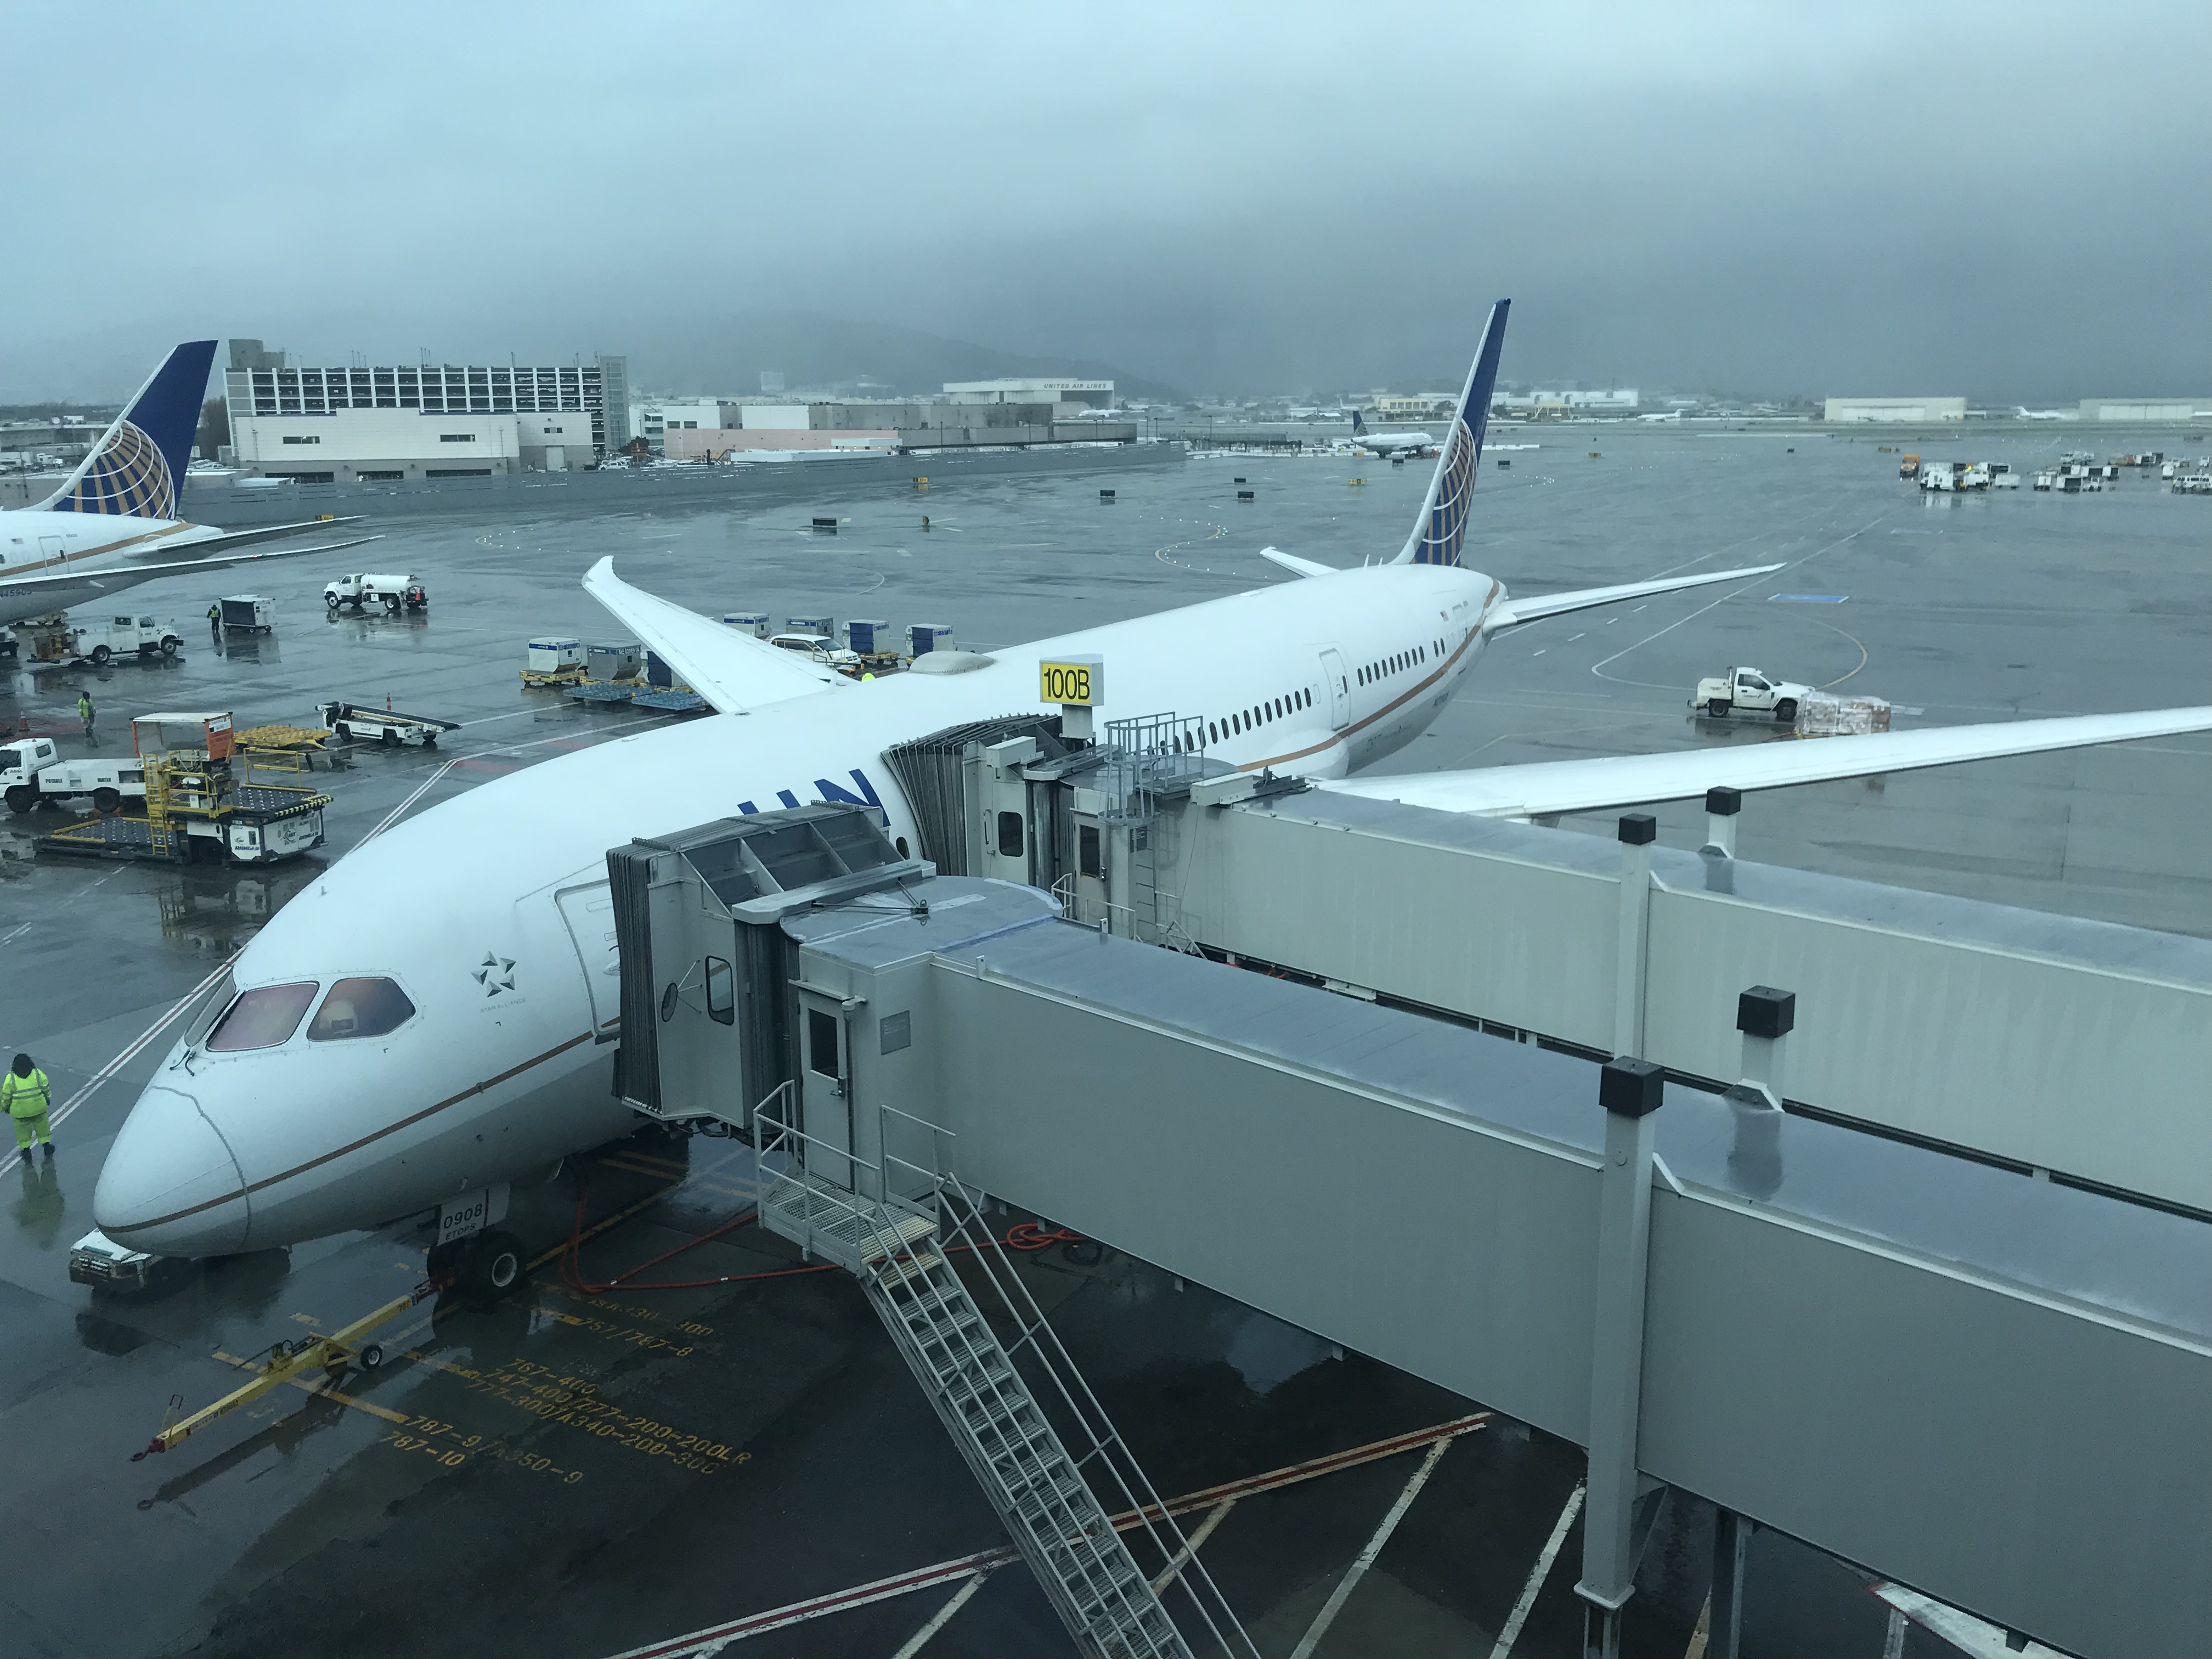 United Polaris Business Class Review During COVID-19 – GRU to EWR